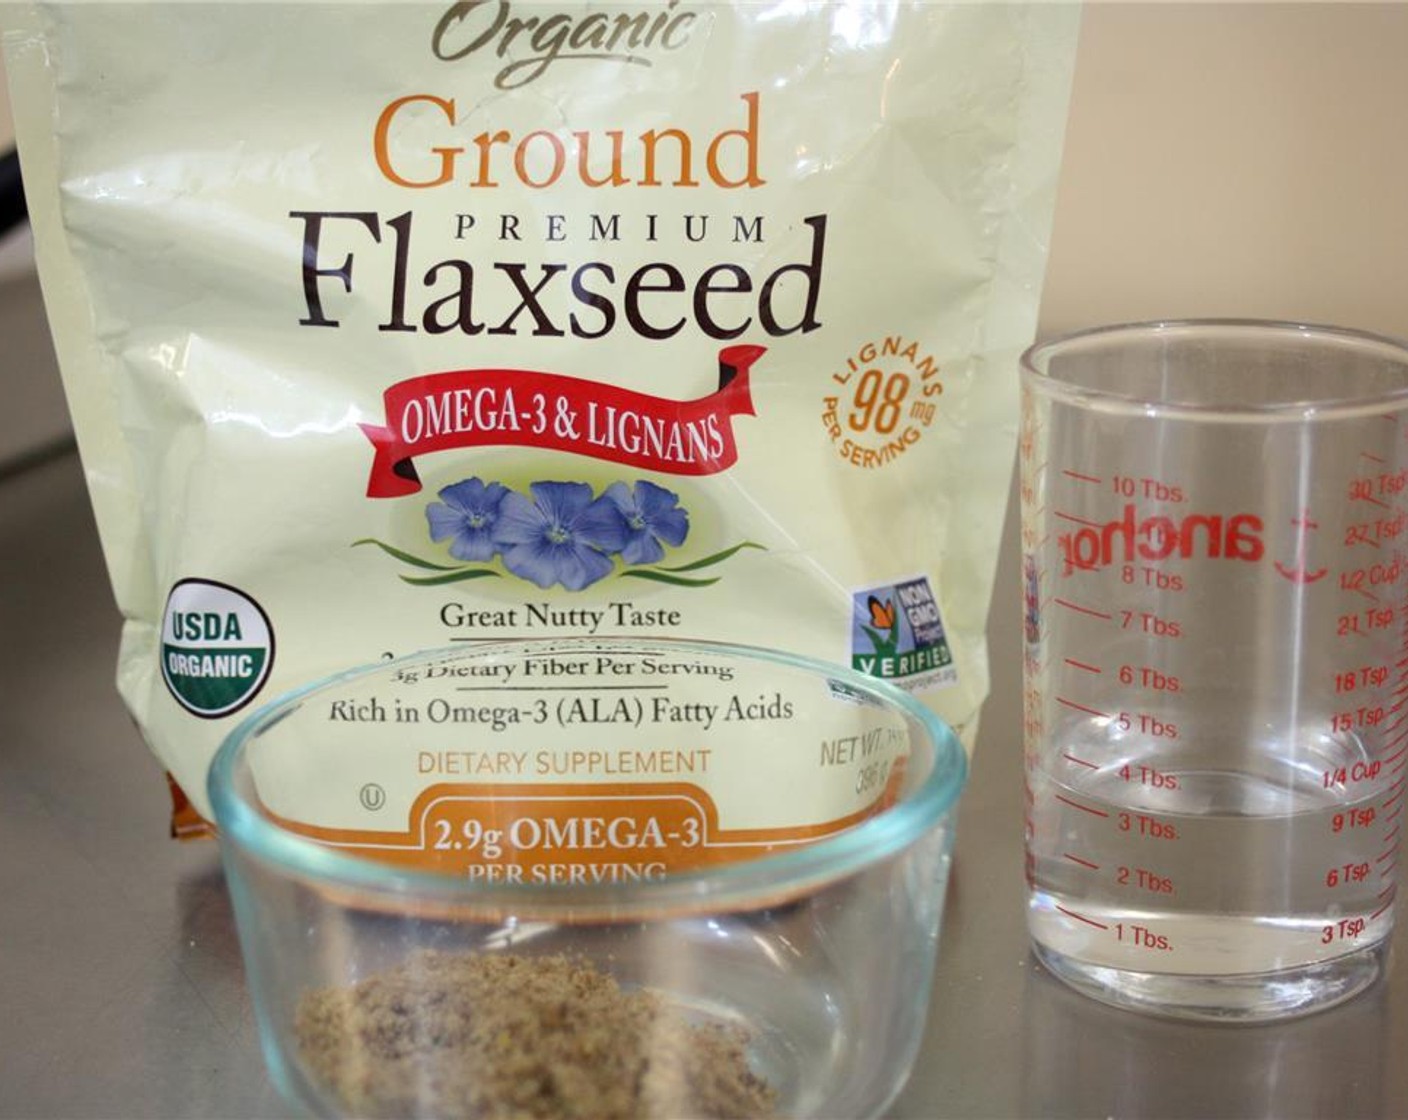 step 5 In a small bowl combine the Ground Flaxseed (1 1/2 Tbsp) and Water (3 Tbsp), set aside.